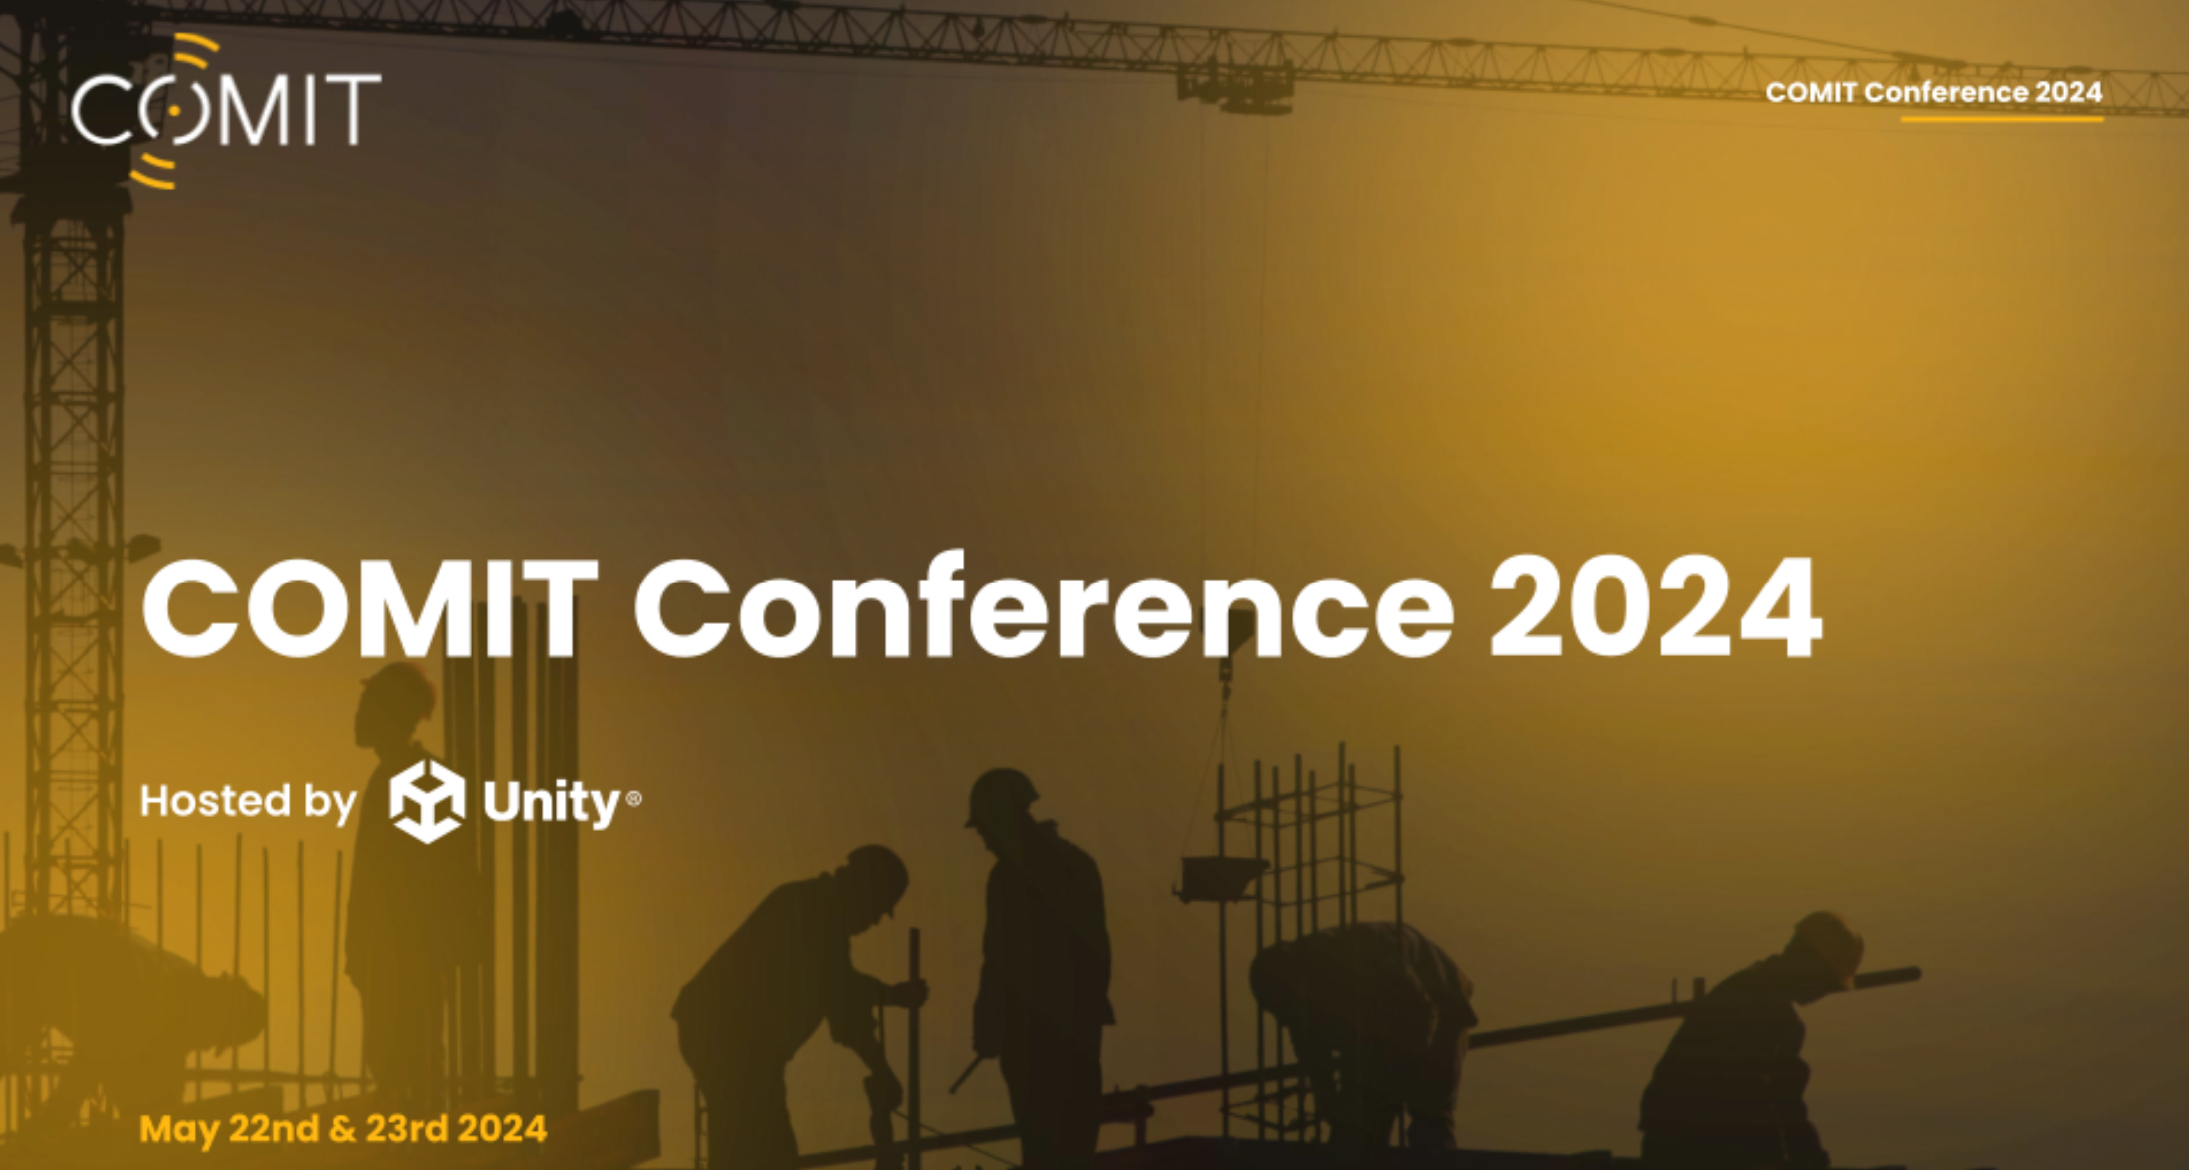 COMIT conference 2024